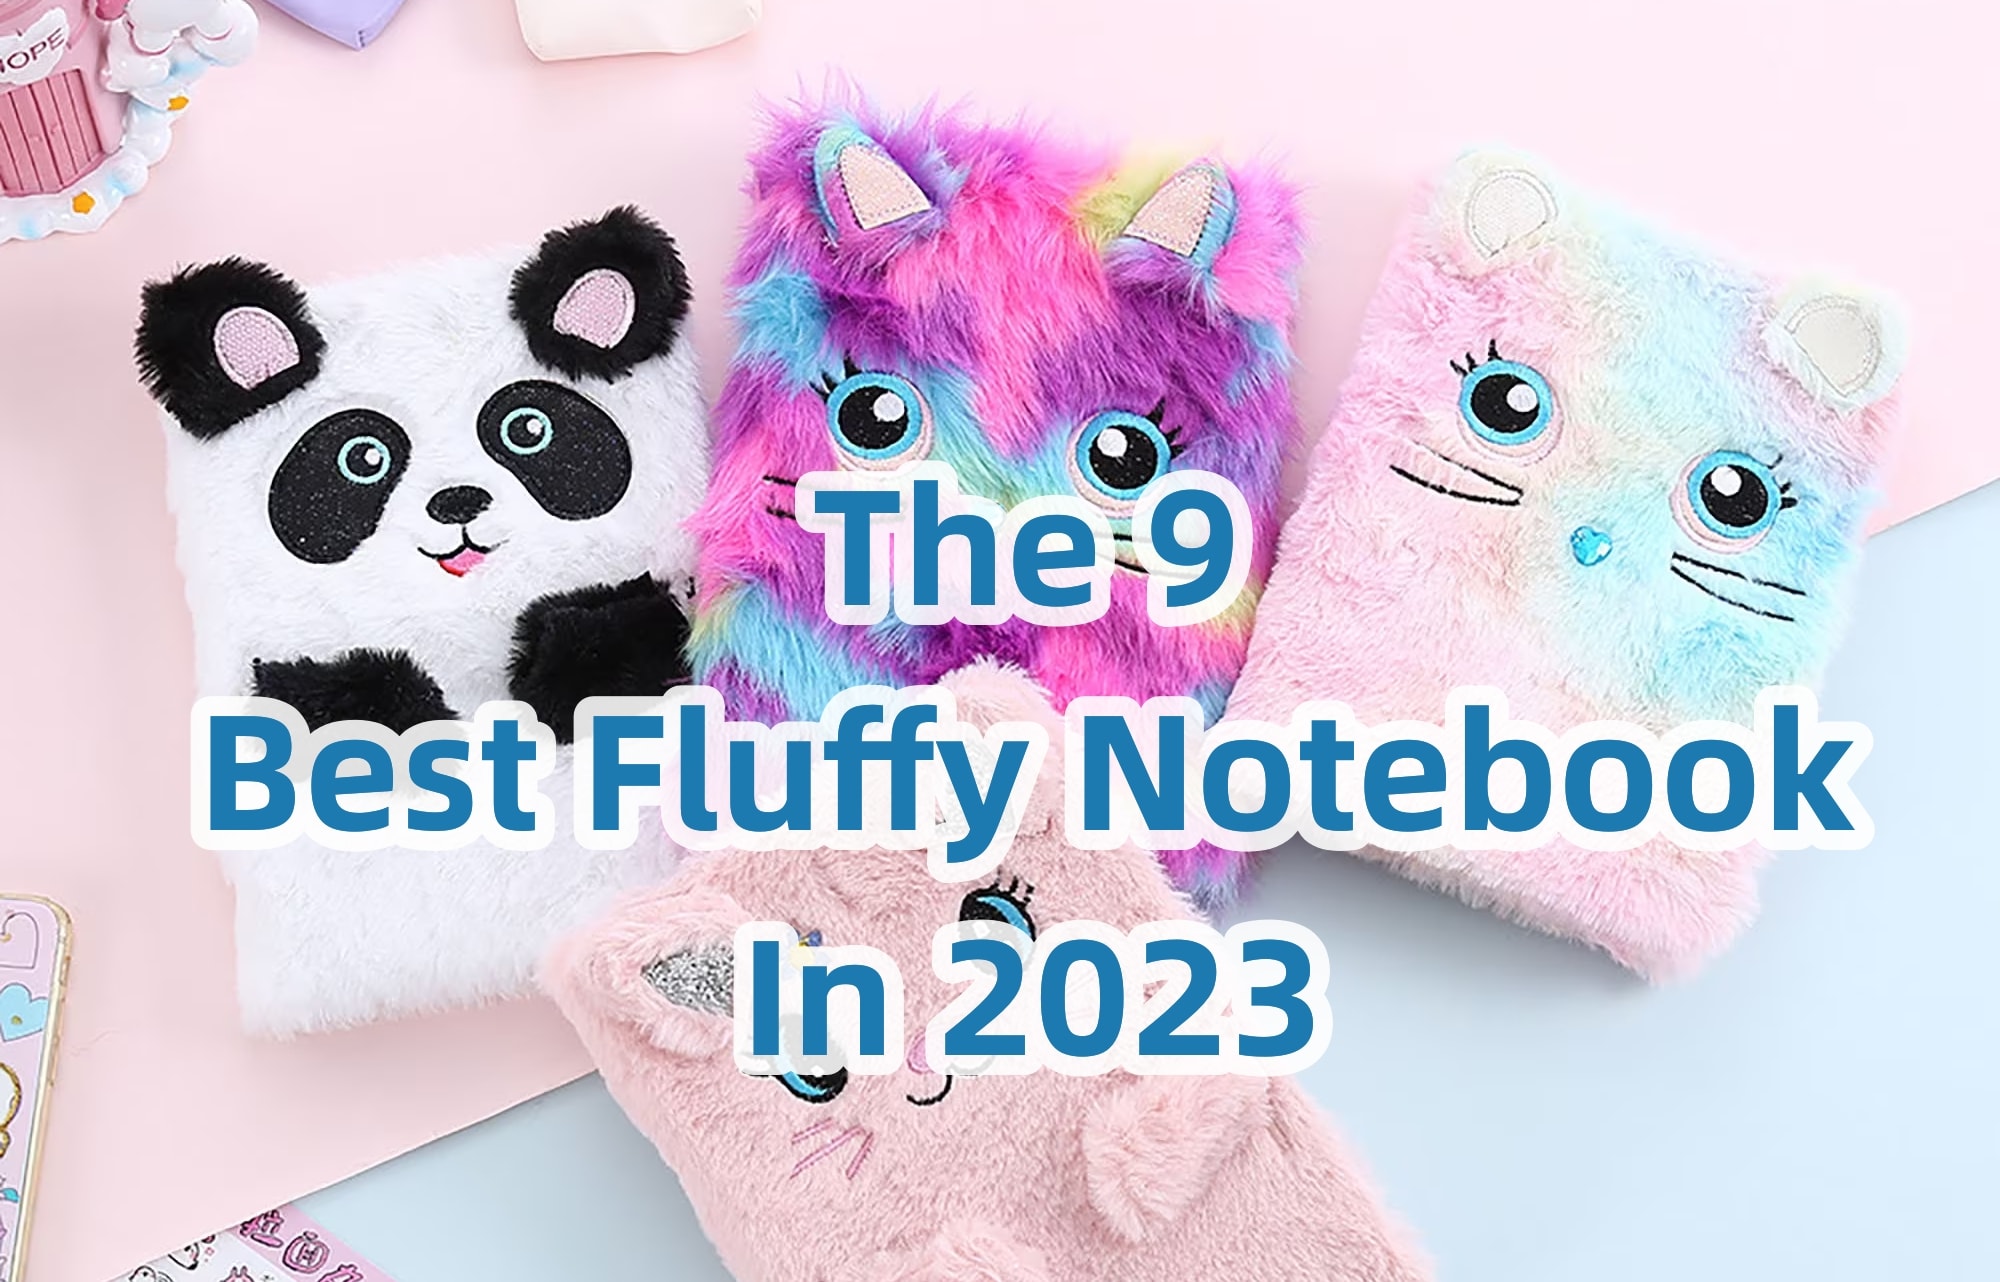 The 9 Best Fluffy Notebook In 2023